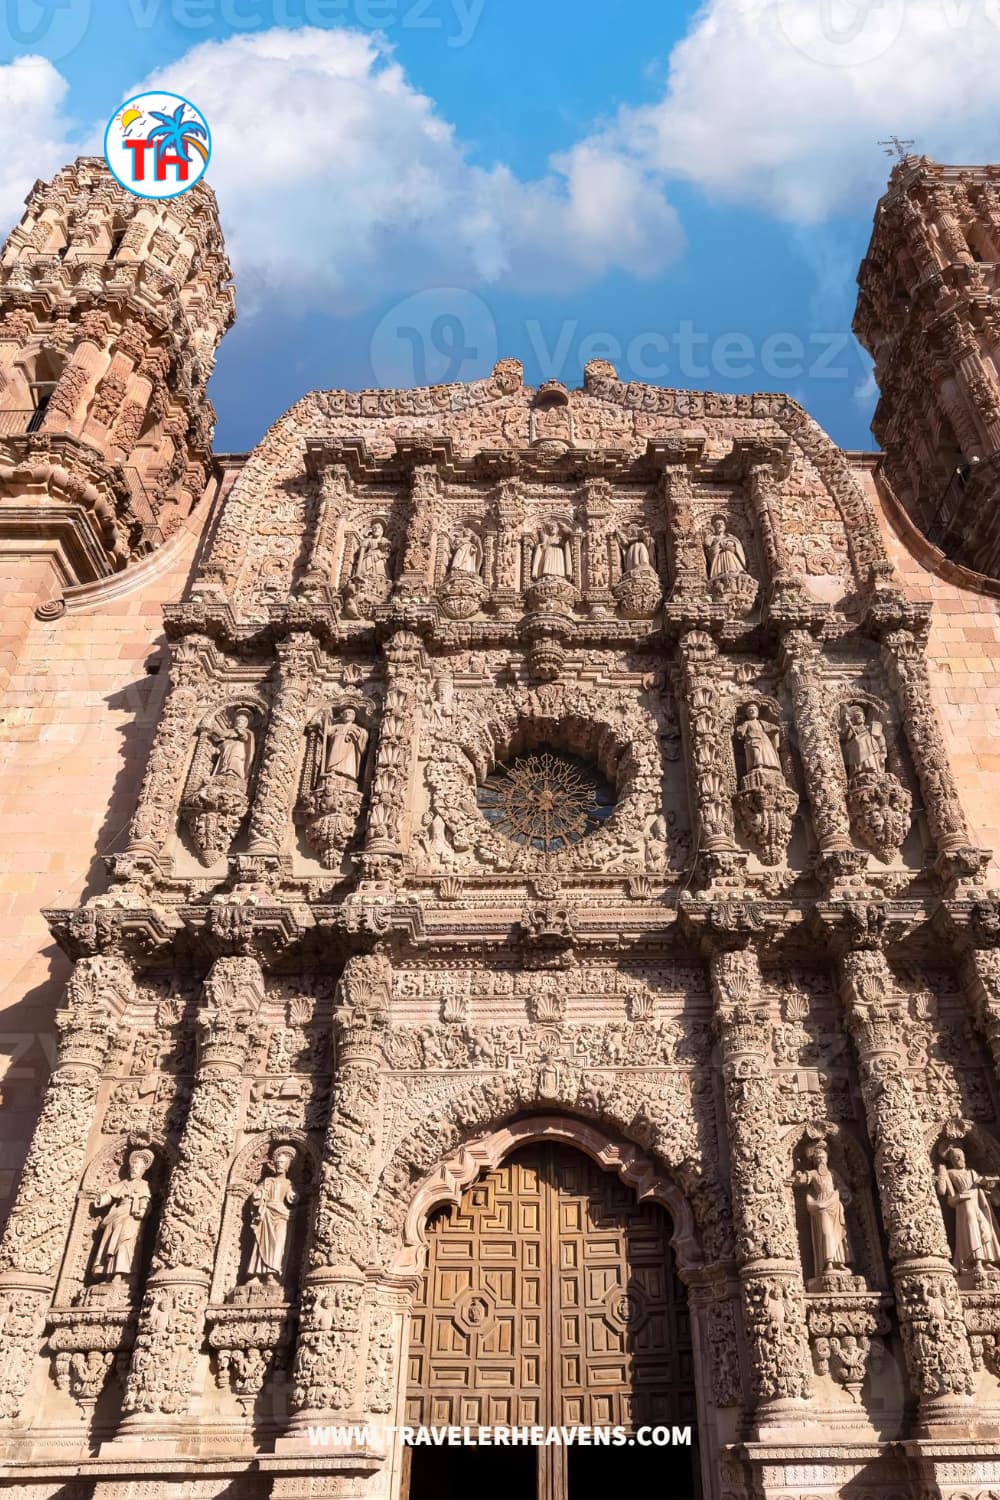 Beautiful Destinations, Best Places to Visit in Zacatecas, Mexico, Mexico Best Places, Mexico Travel Guide, Travel to Zacatecas, Visit Zacatecas